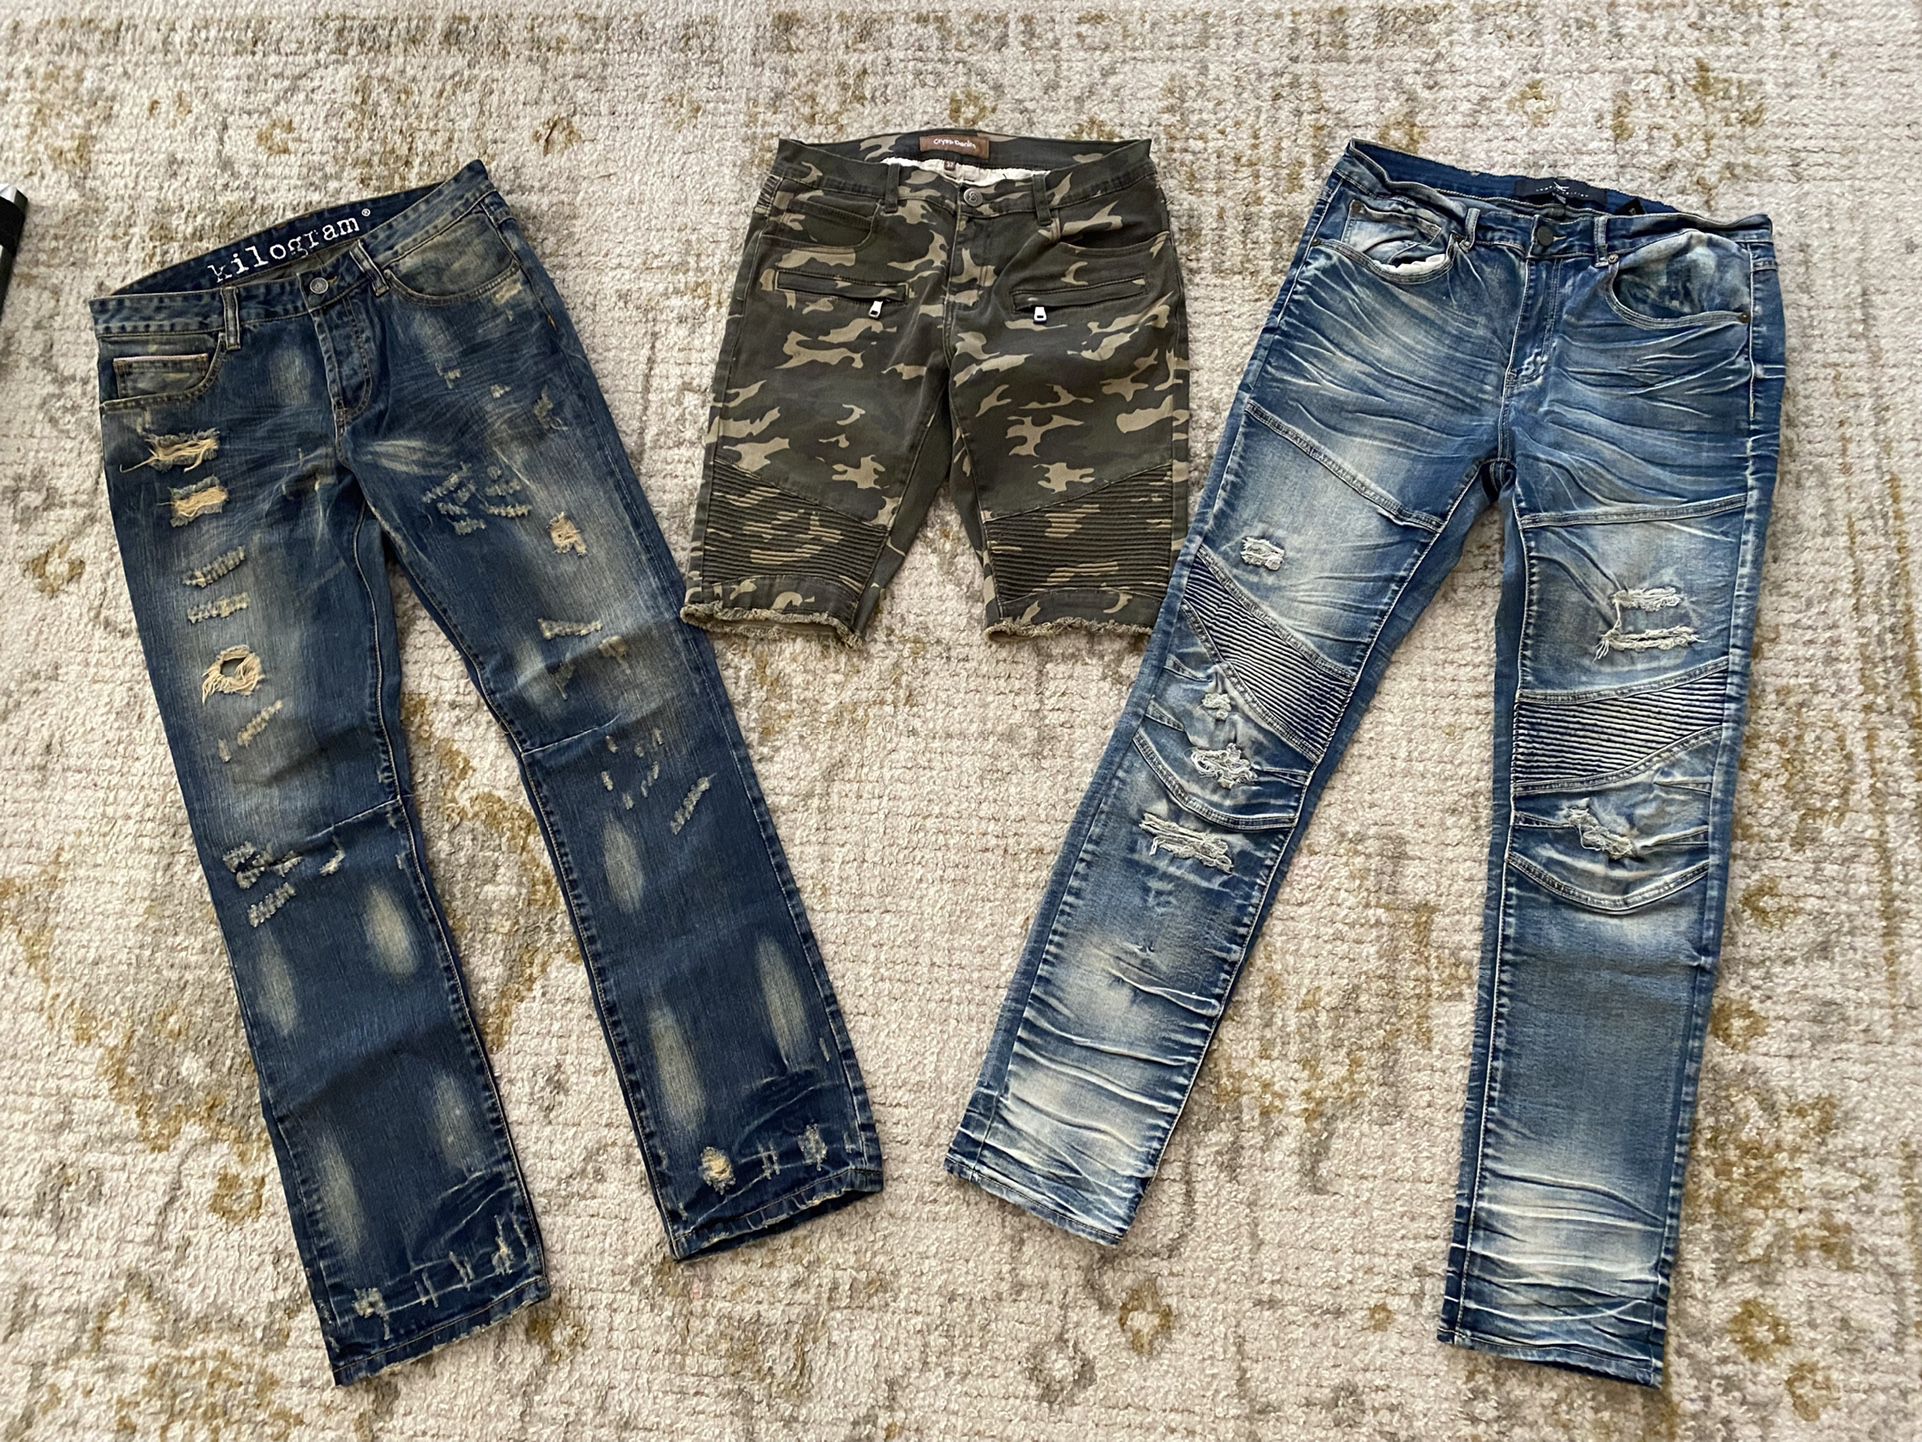 Men’s Size 32 Jeans And Shorts. All 3 For $40